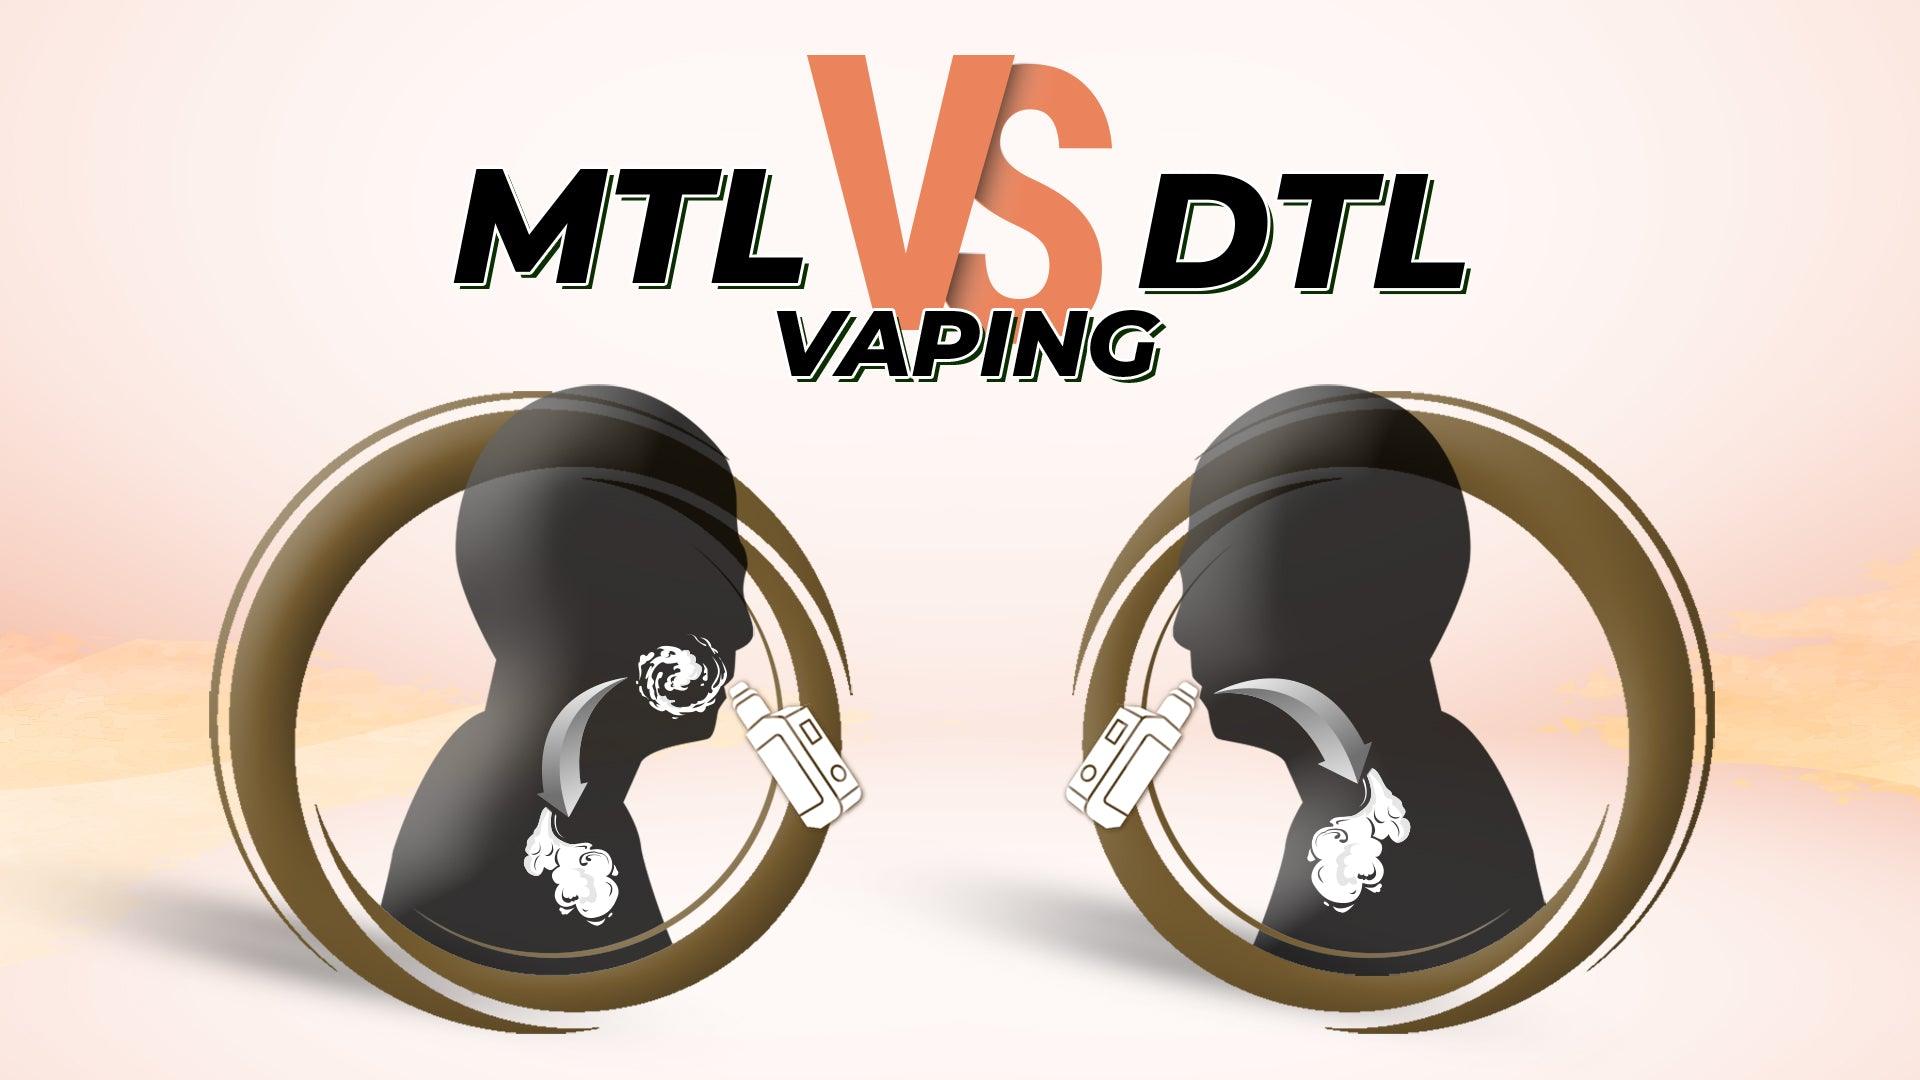 What’s the difference between MTL and DTL vaping? - Category:Vape Kits, Sub Category:Vaping Style